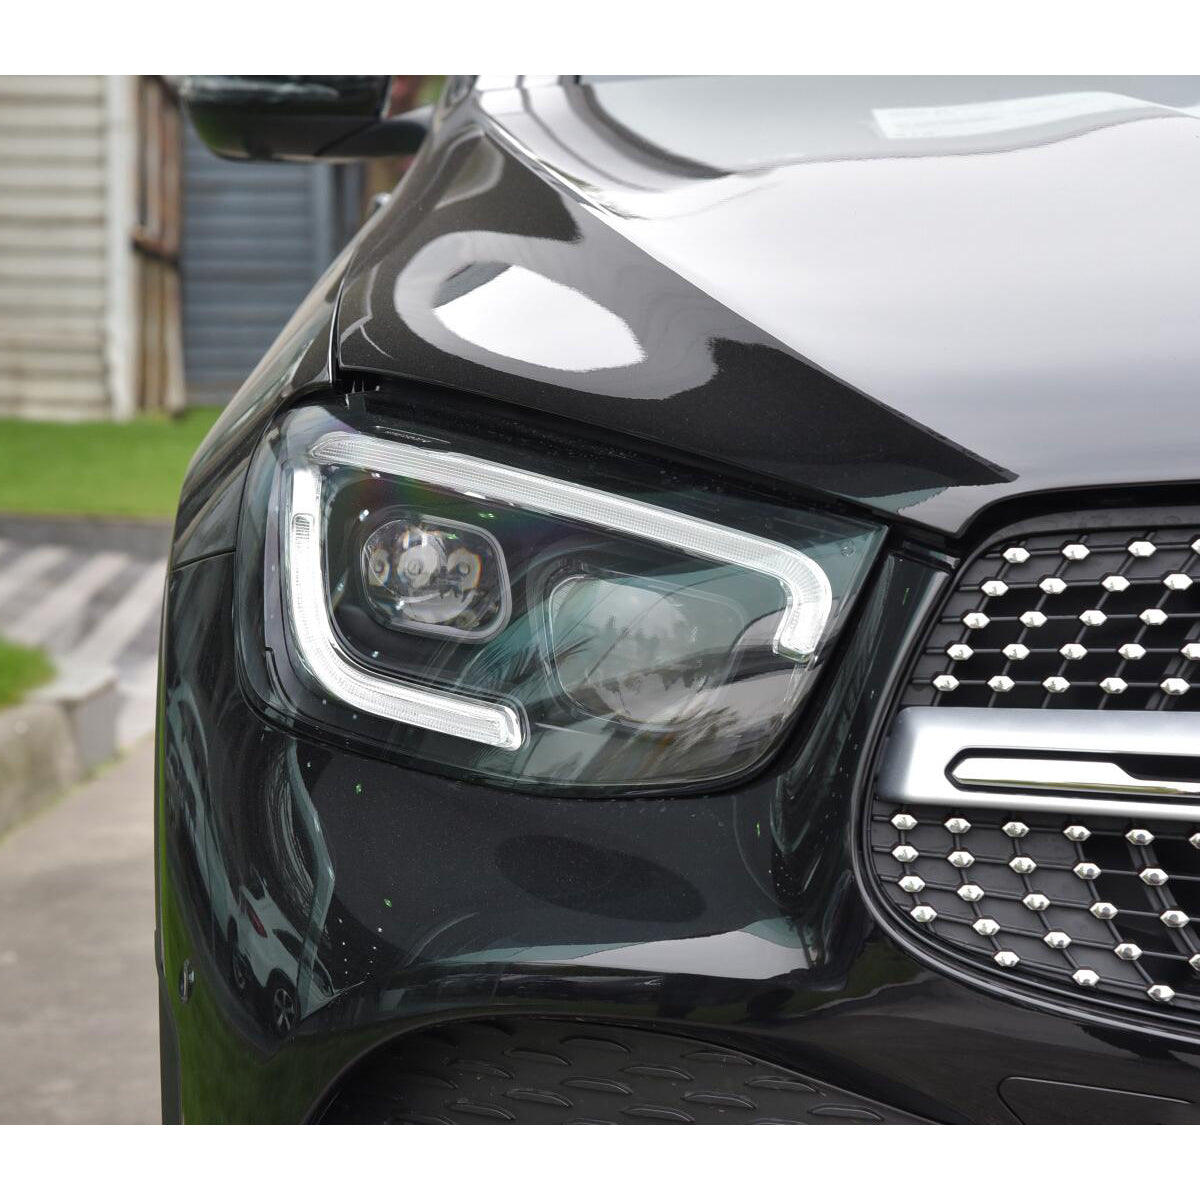 The headlight for GLC 2016-2019 upgrade to 2021+